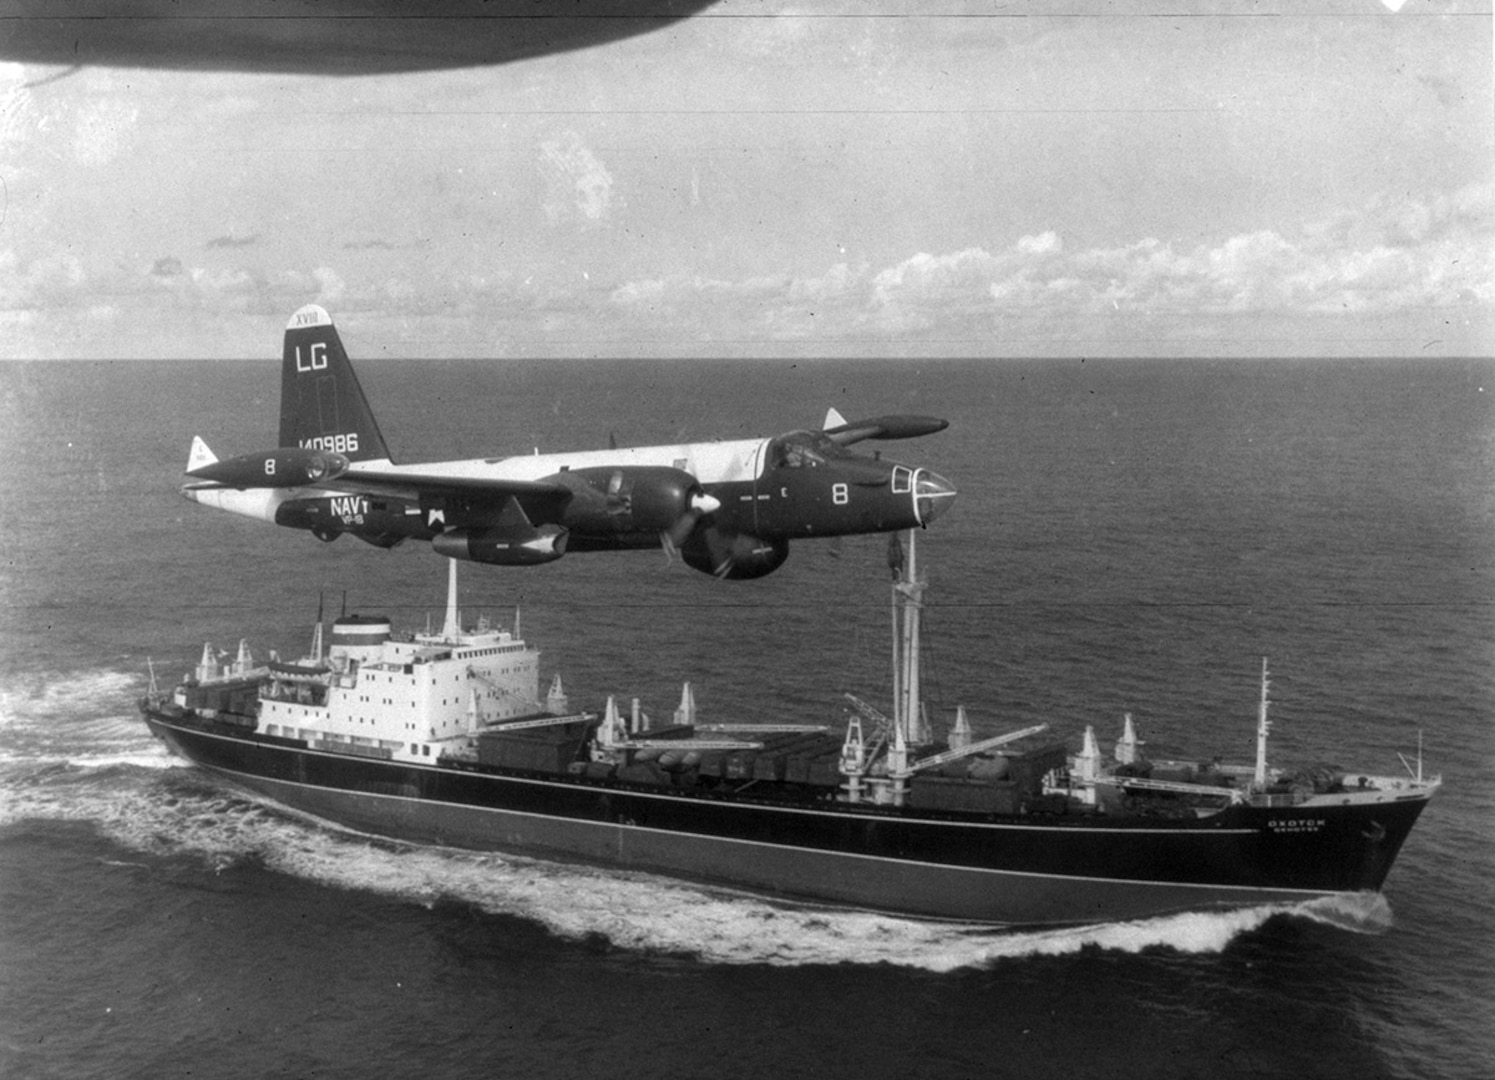 A U.S. Navy P2V Neptune flies over a Soviet freighter Oct. 27, 1962, during the height of the blockade during the Cuban Missile Crisis. National Archives and Records Administration photo